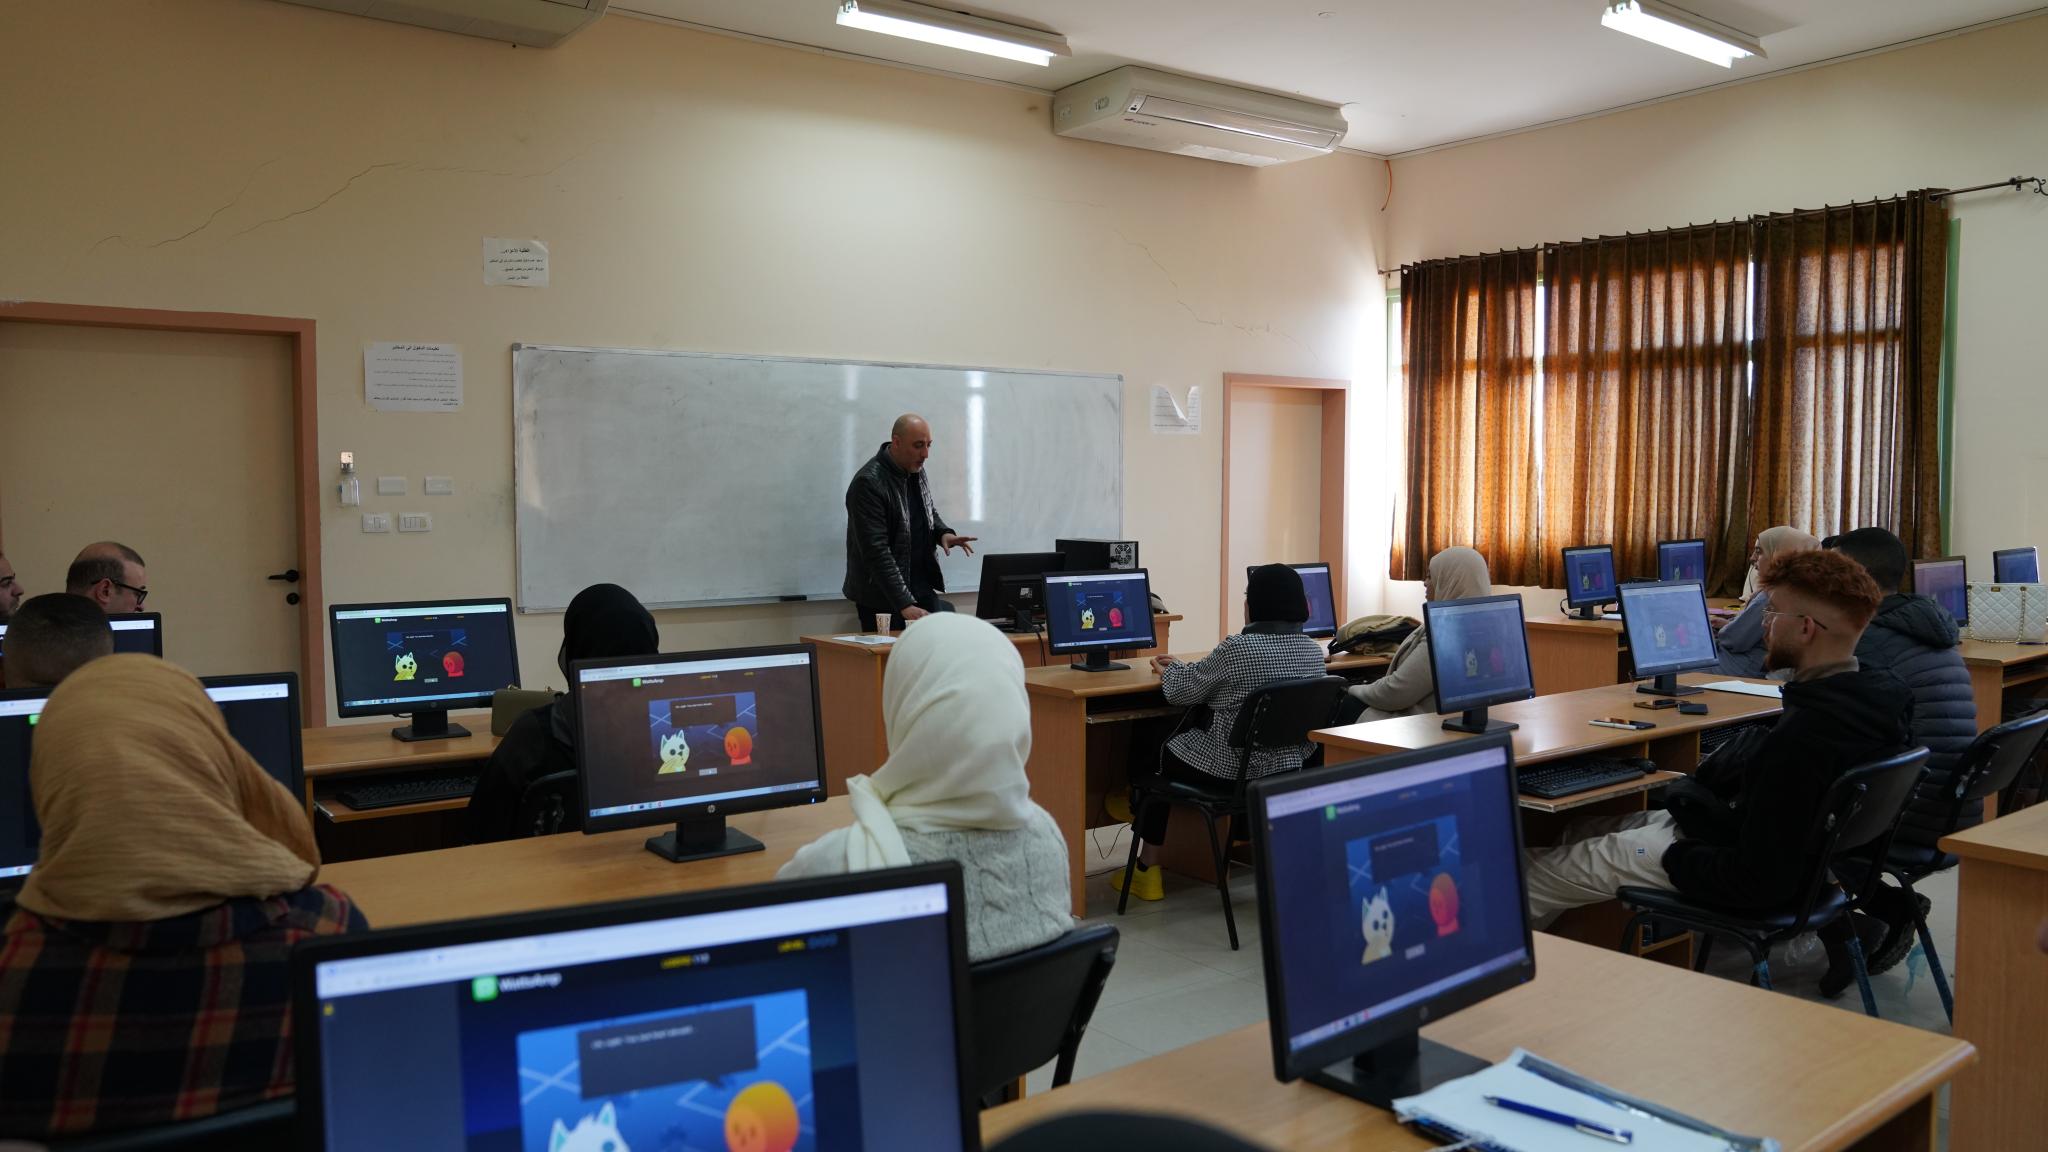 An Awareness Course about Information Security and Managing Electronic Accounts